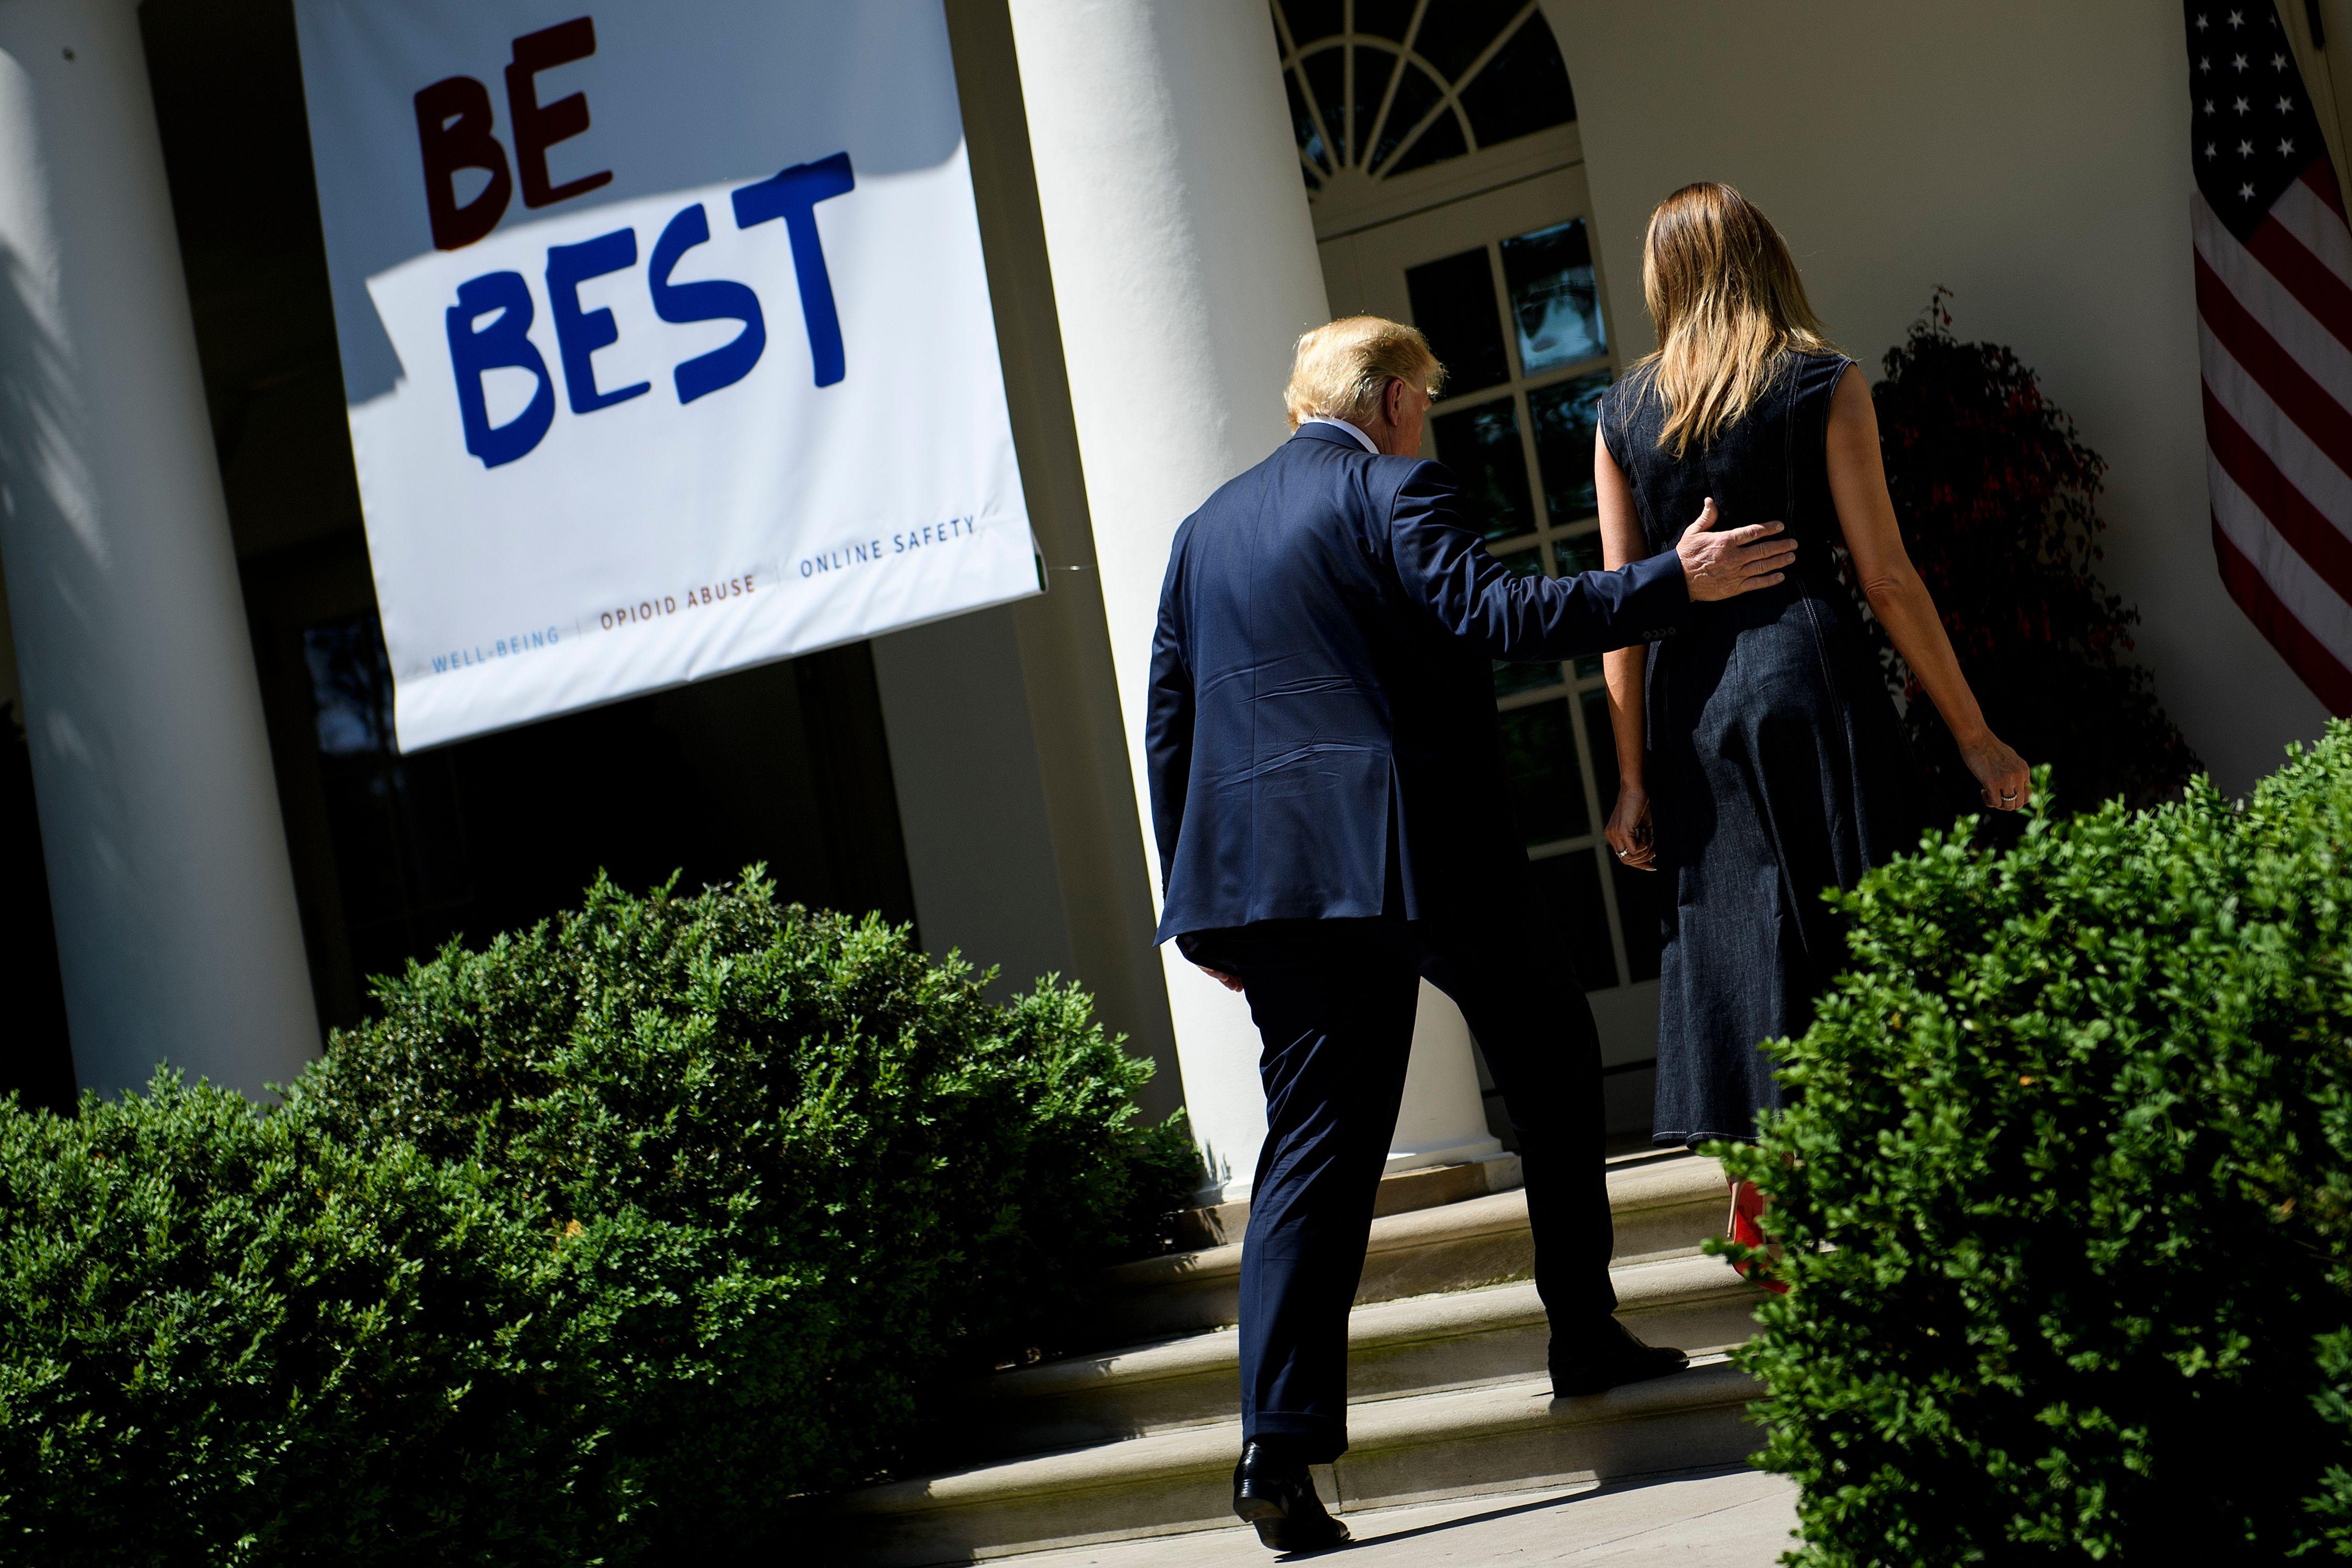 President Donald Trump and first lady Melania Trump leave after an event to celebrate the one year anniversary of the "Be Best" initiative in the Rose Garden of the White House on Tuesday.